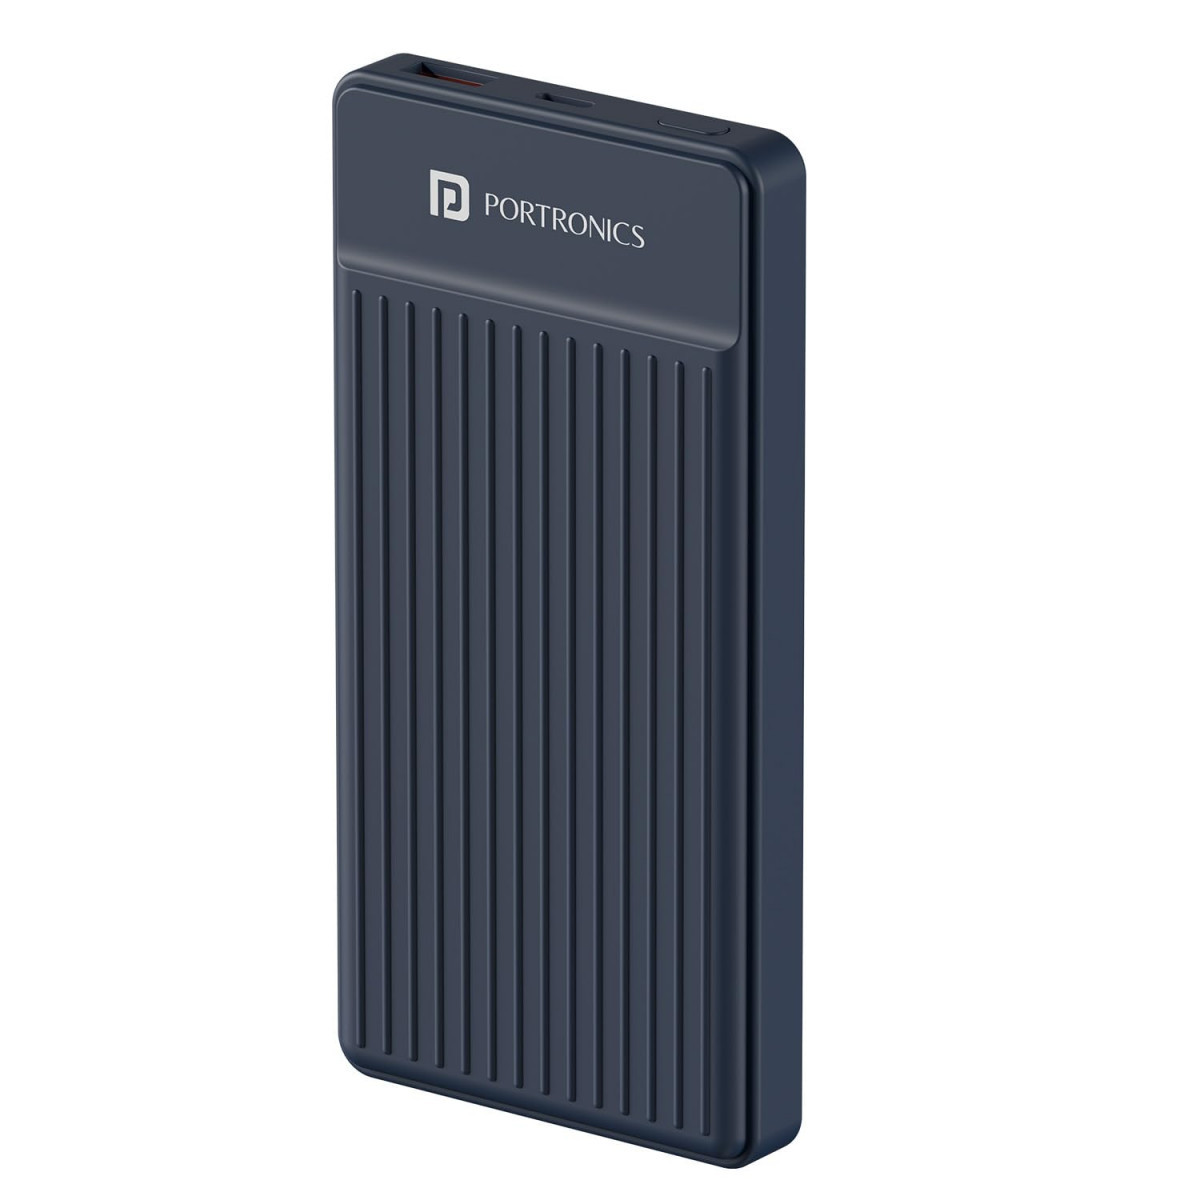 Portronics Luxcell B12 10000mAh Ultra Slim Power Bank with USB-A Output Port  Type C Input Port